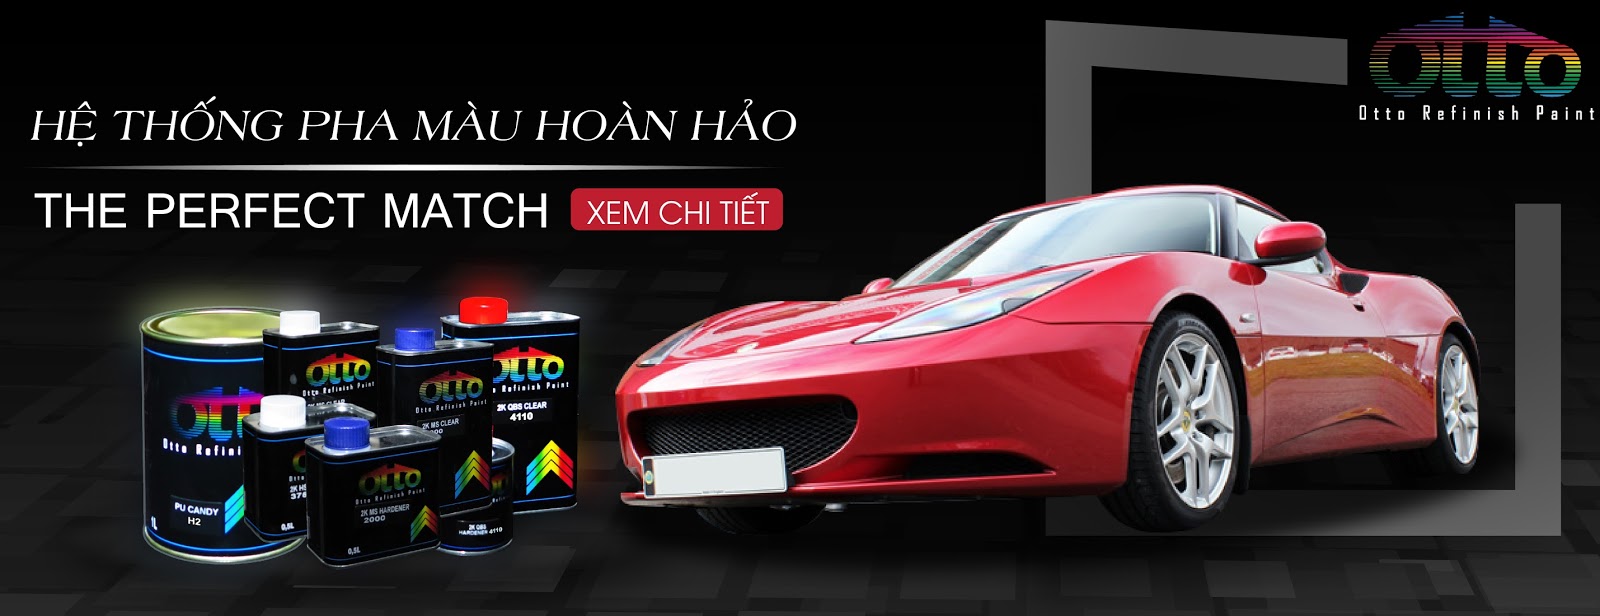 banner-otto-chat-luong-xe-hoi-01.jpg